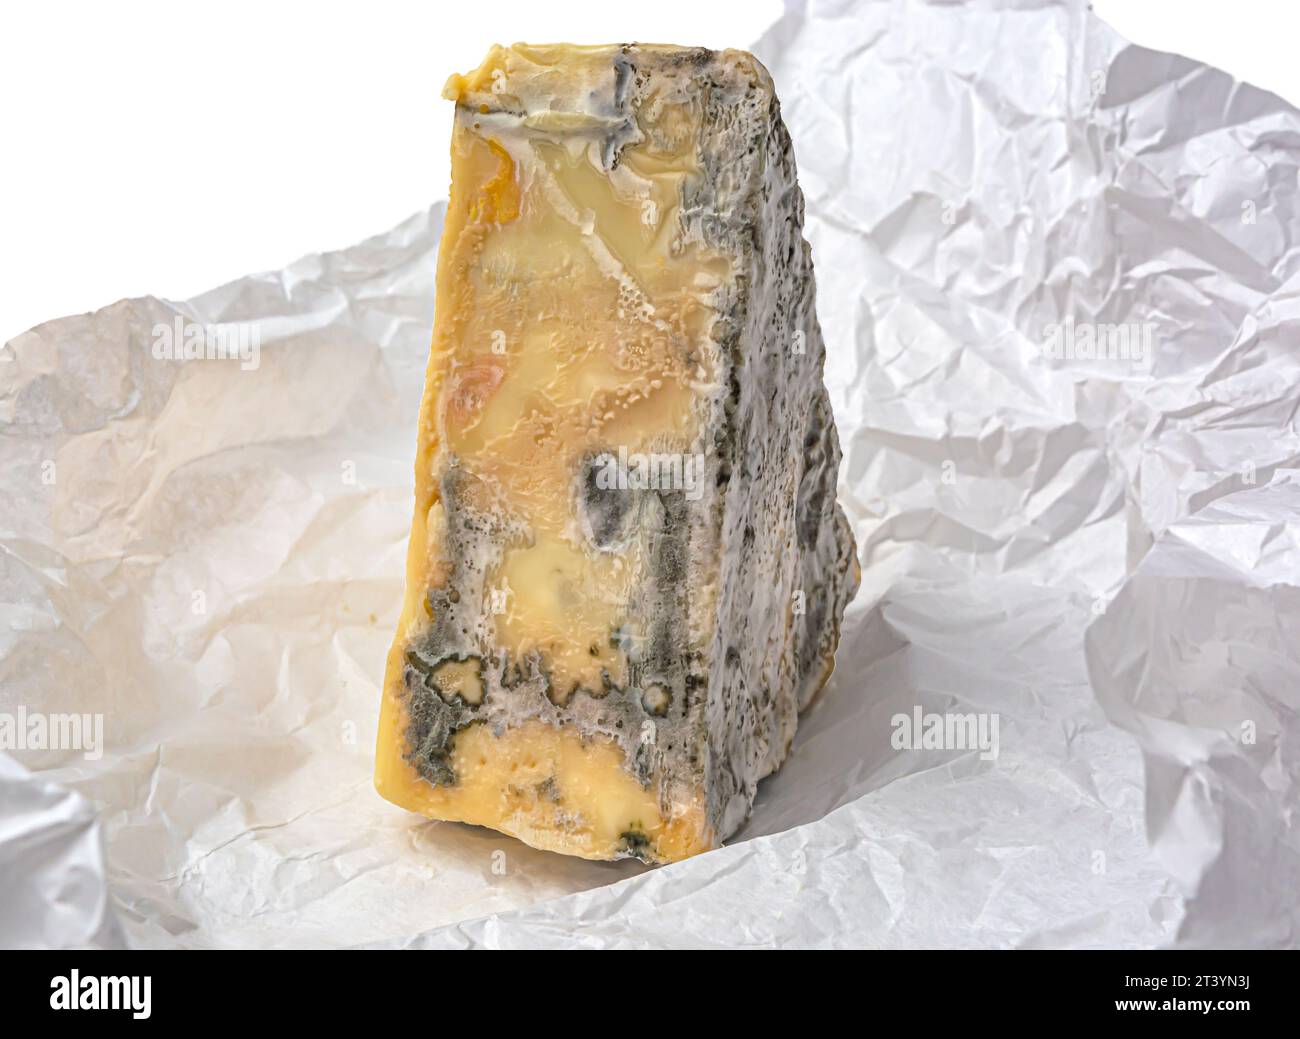 triangular piece of cheese with mold on white crumpled paper close-up Stock Photo